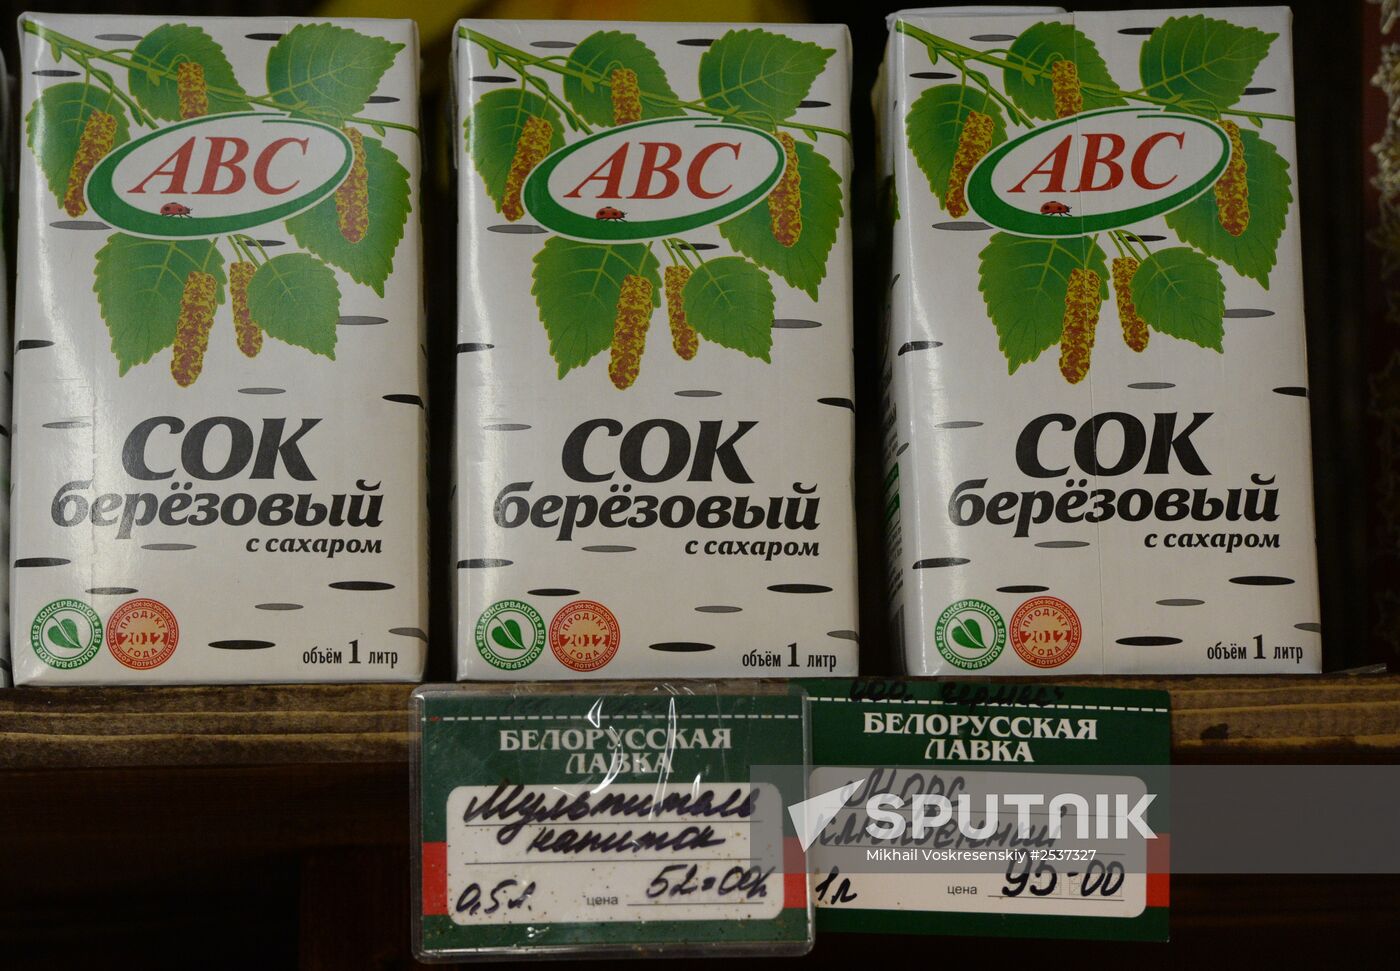 Belorussian products in Moscow